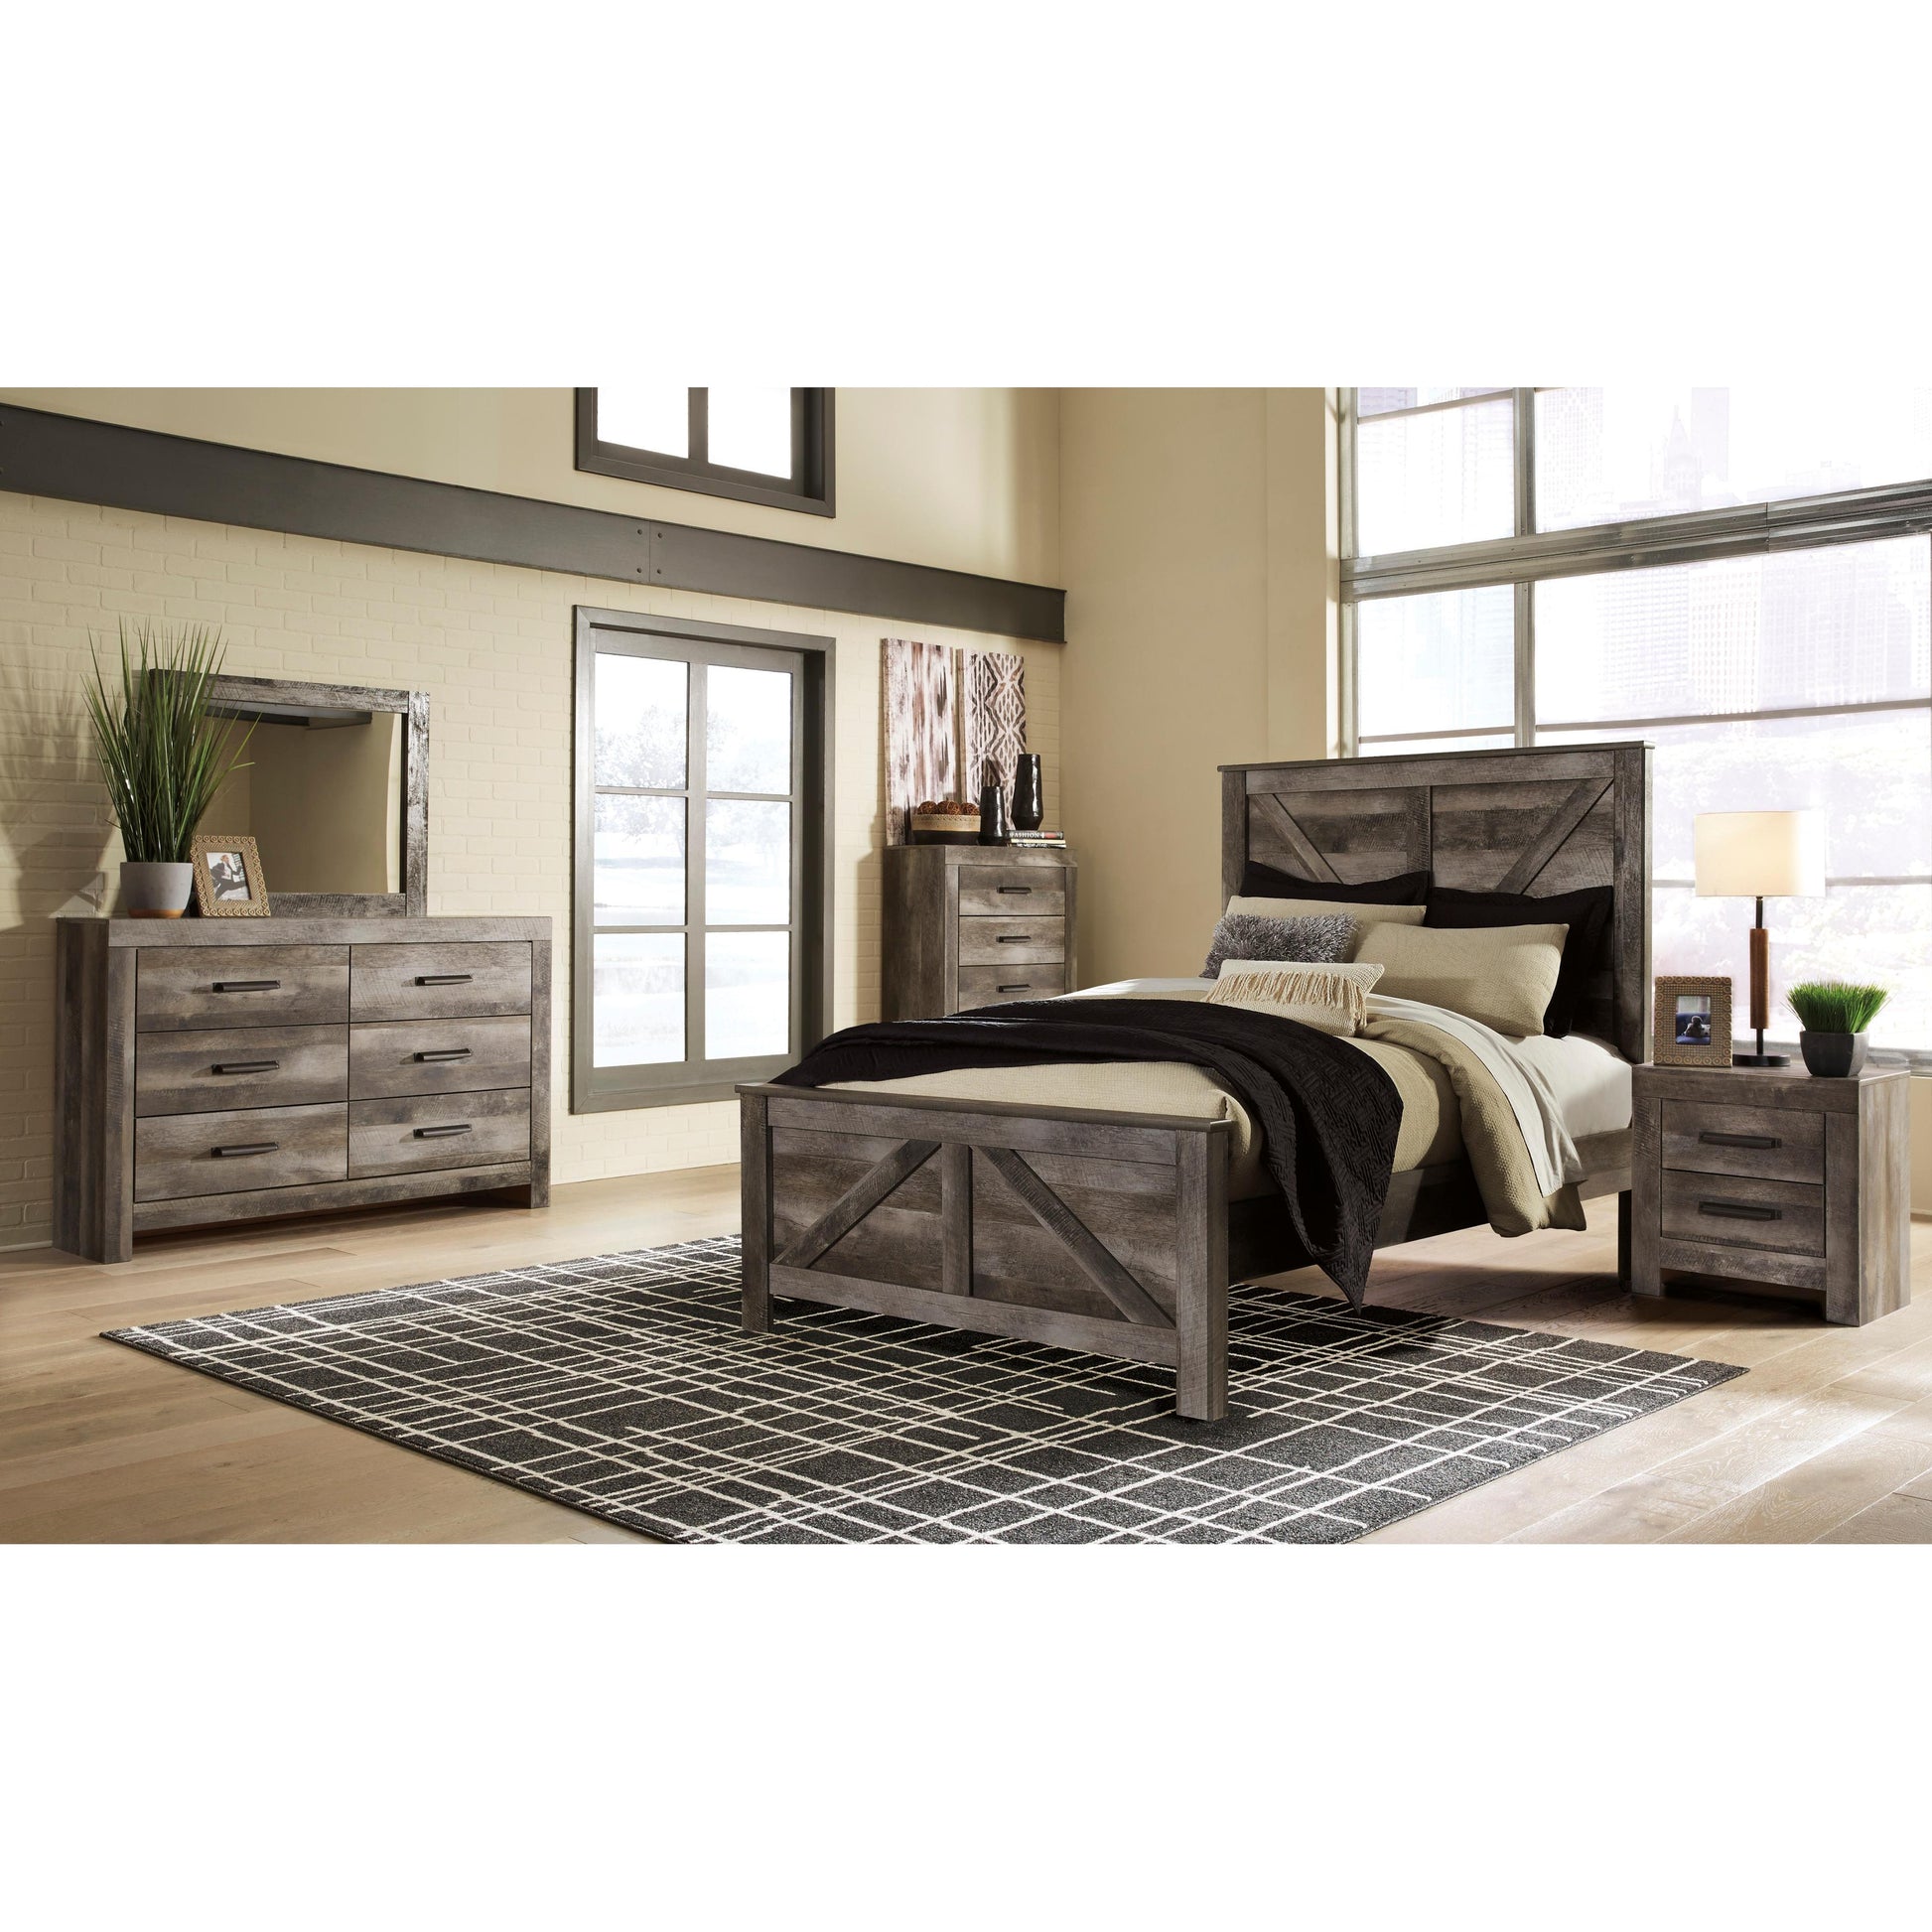 Signature Design by Ashley Wynnlow B440 6 pc Queen Crossbuck Panel Bedroom Set IMAGE 1